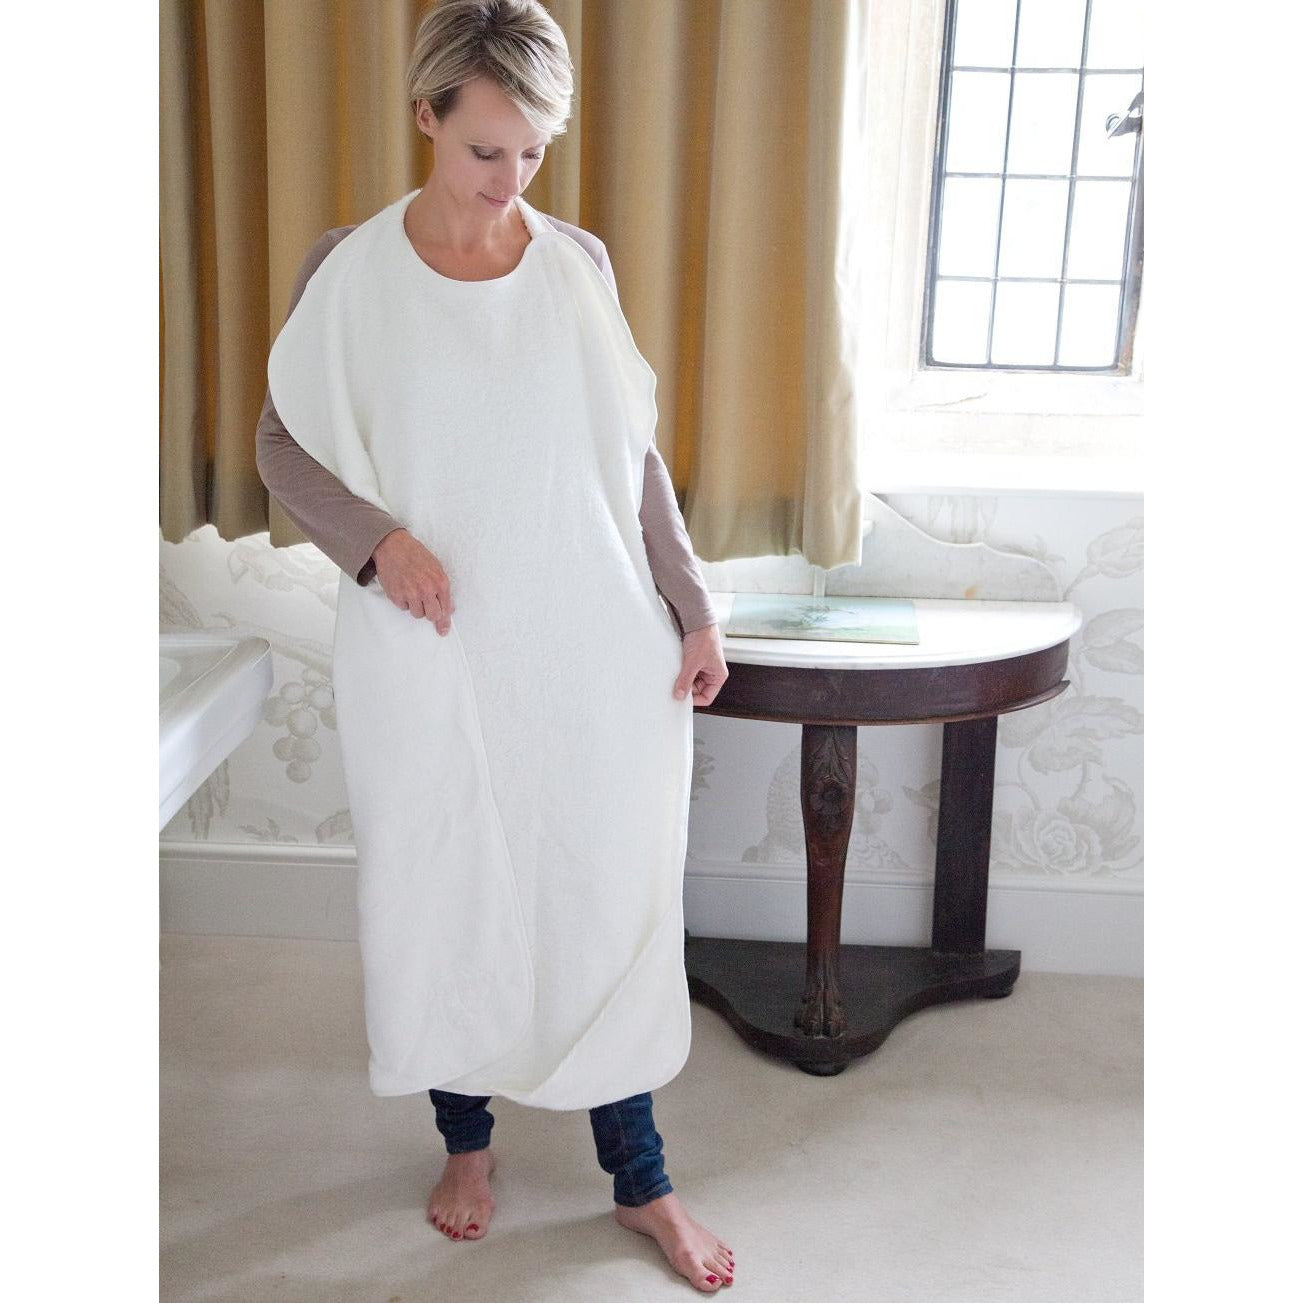 image to show size of Cuddledry apron towel and how to wear it